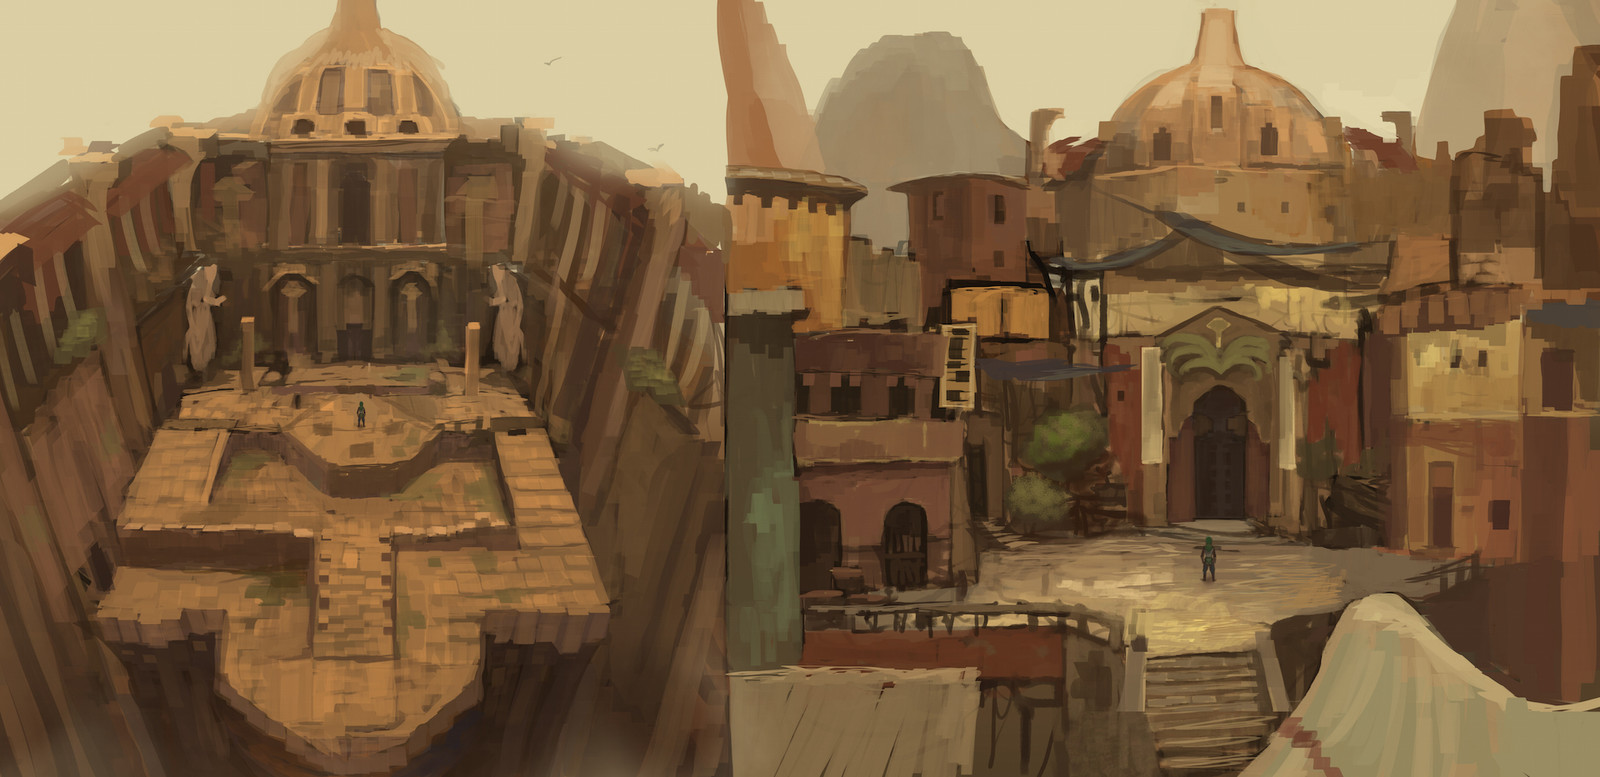 Concept for the Zaber combat arena interior and exterior. 